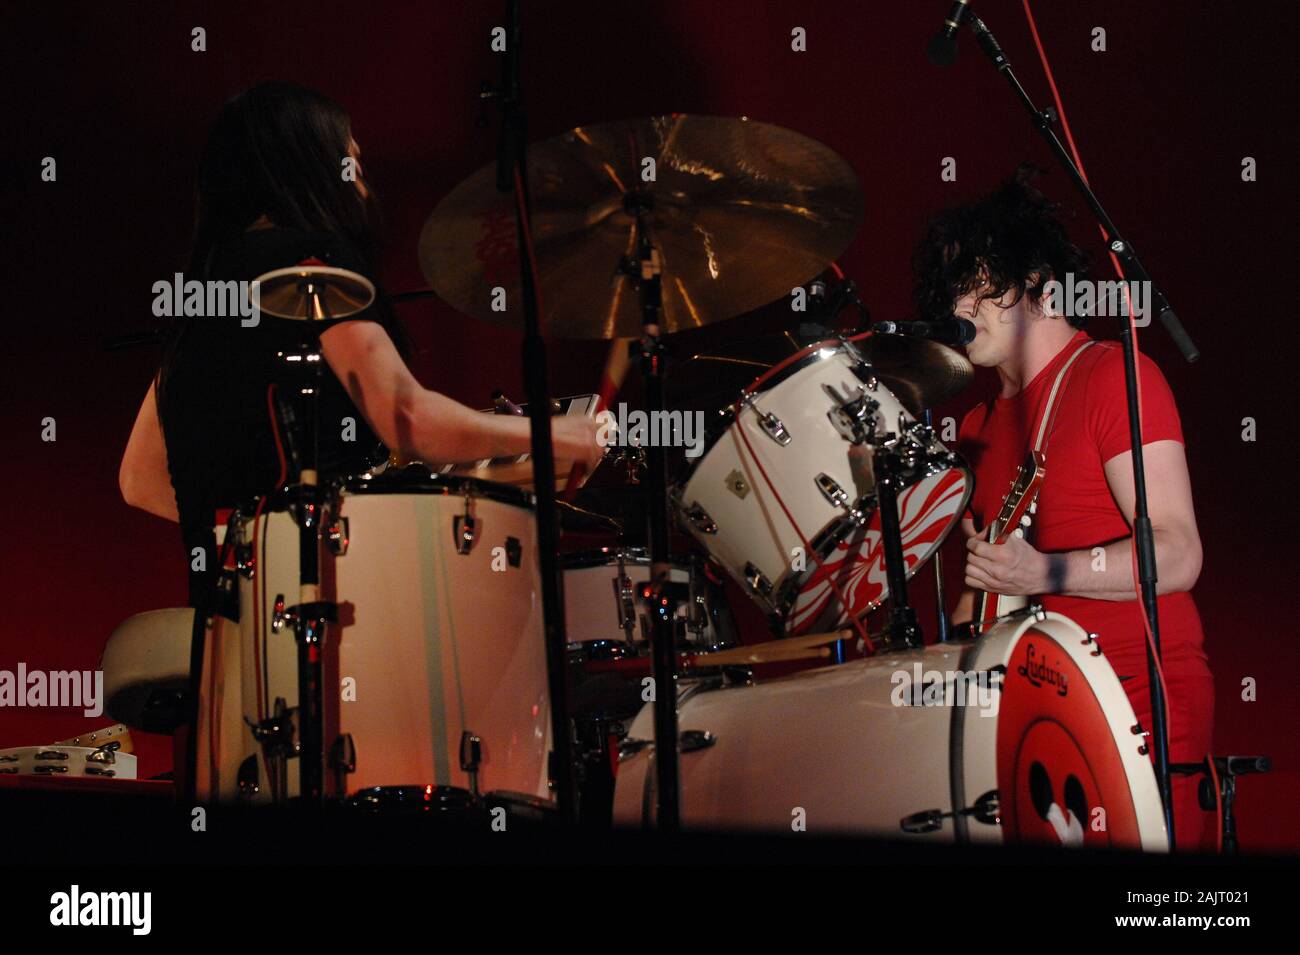 Milan Italy  07 June 2007,Live concert of The White Stripes at the Idorscalo:The White Stripes,Meg White and Jack White,during the concert Stock Photo